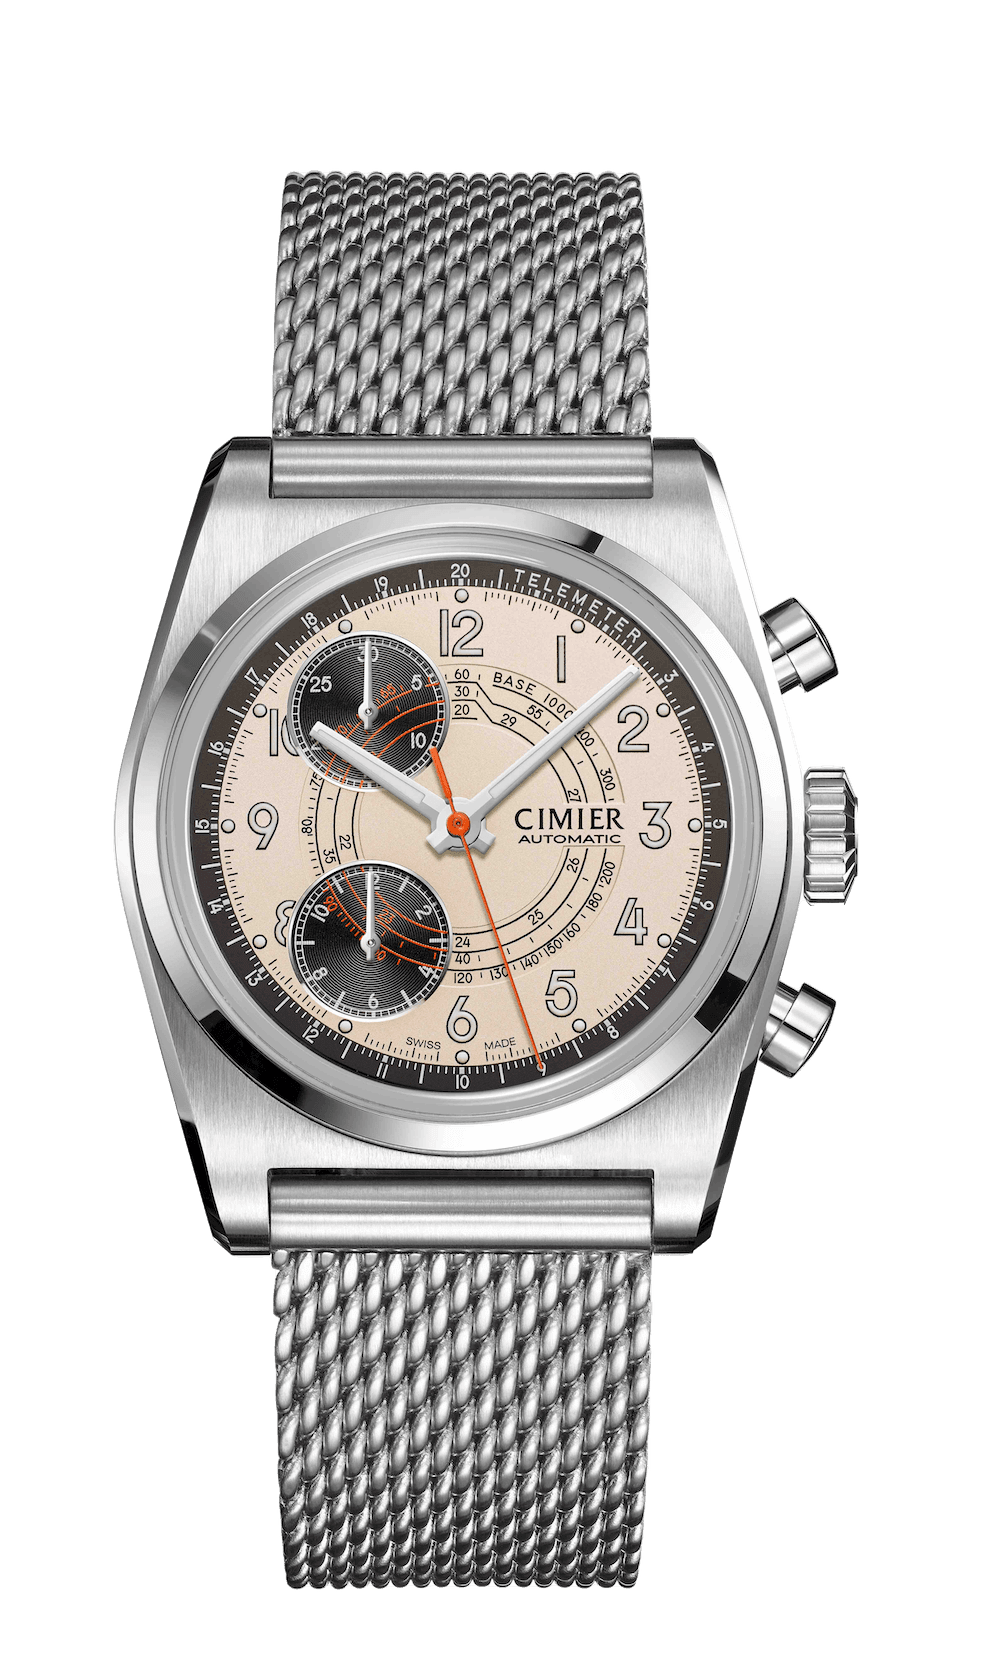 Cimier 711 Heritage Chronograph wristwatch with white dial and mesh bracelet